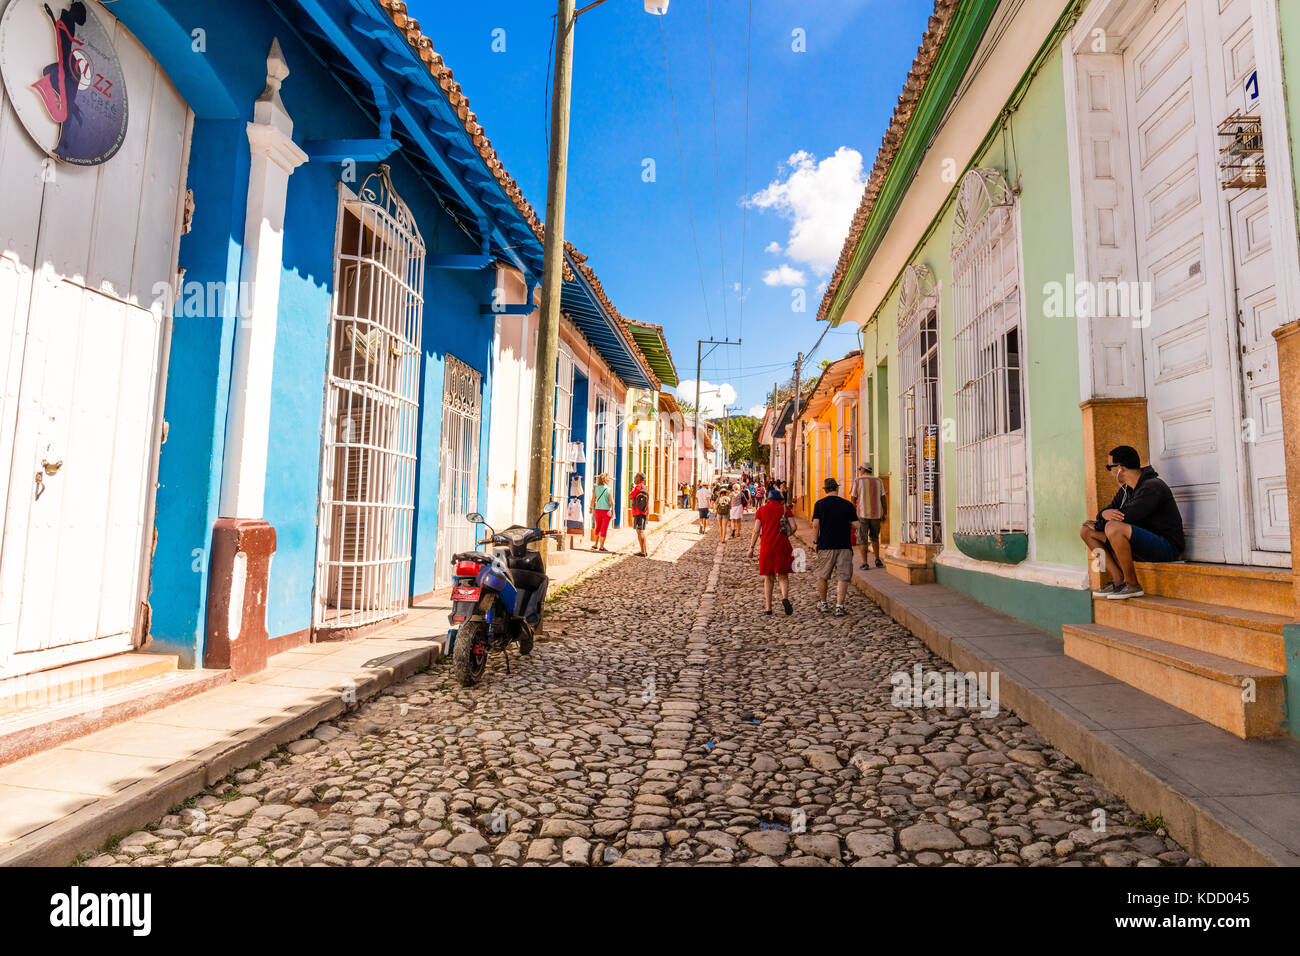 Spanish Colonial architecture with colourful houses,  cobblestone streets and people in a street scene, Trinidad,  Sancti Spíritus, Cuba, Caribbean Stock Photo